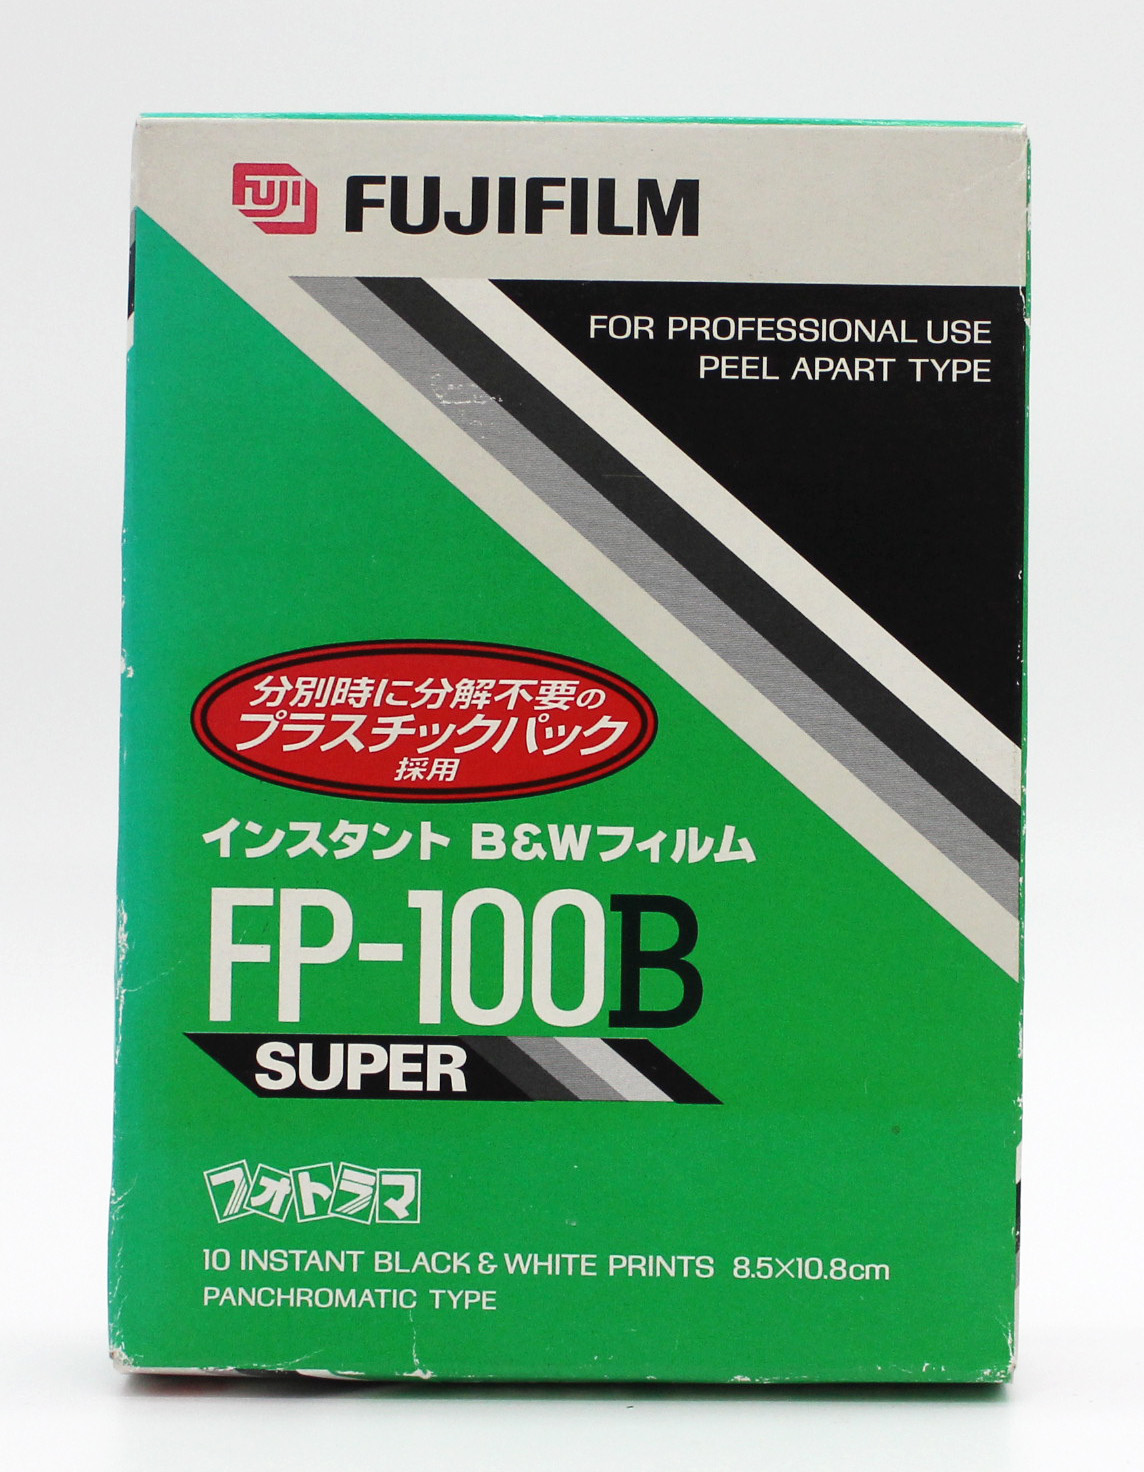 Japan Used Camera Shop | [New] Fujifilm FP-100B Instant Black & White Film (Expired 09/2004) from Japan